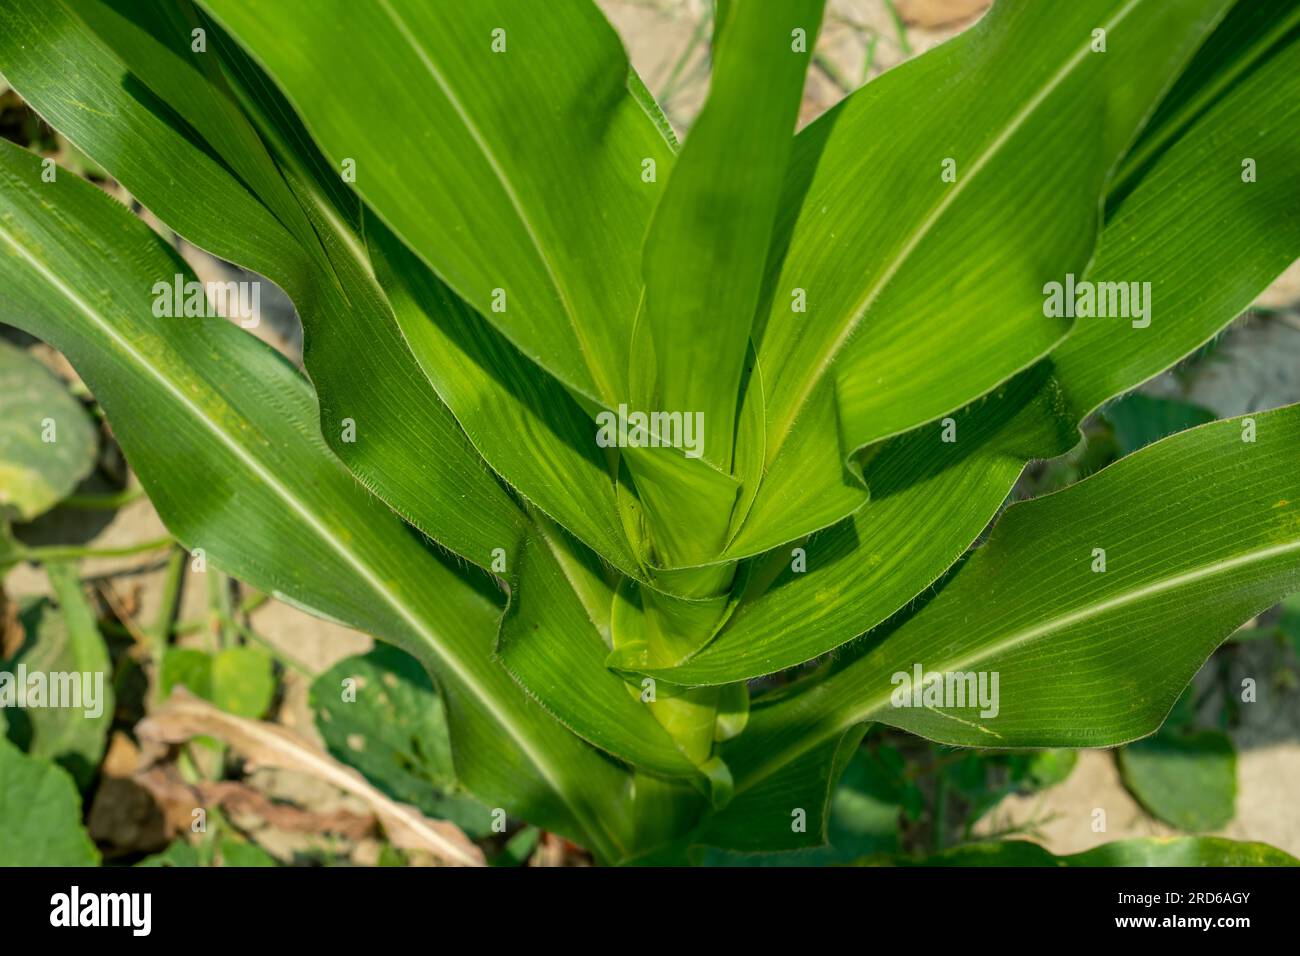 The Corn Plant, or Dracaena fragrans, The corn plant, the maize plant. It has large, elongated, narrow leaves that grow alternately in opposite sites Stock Photo